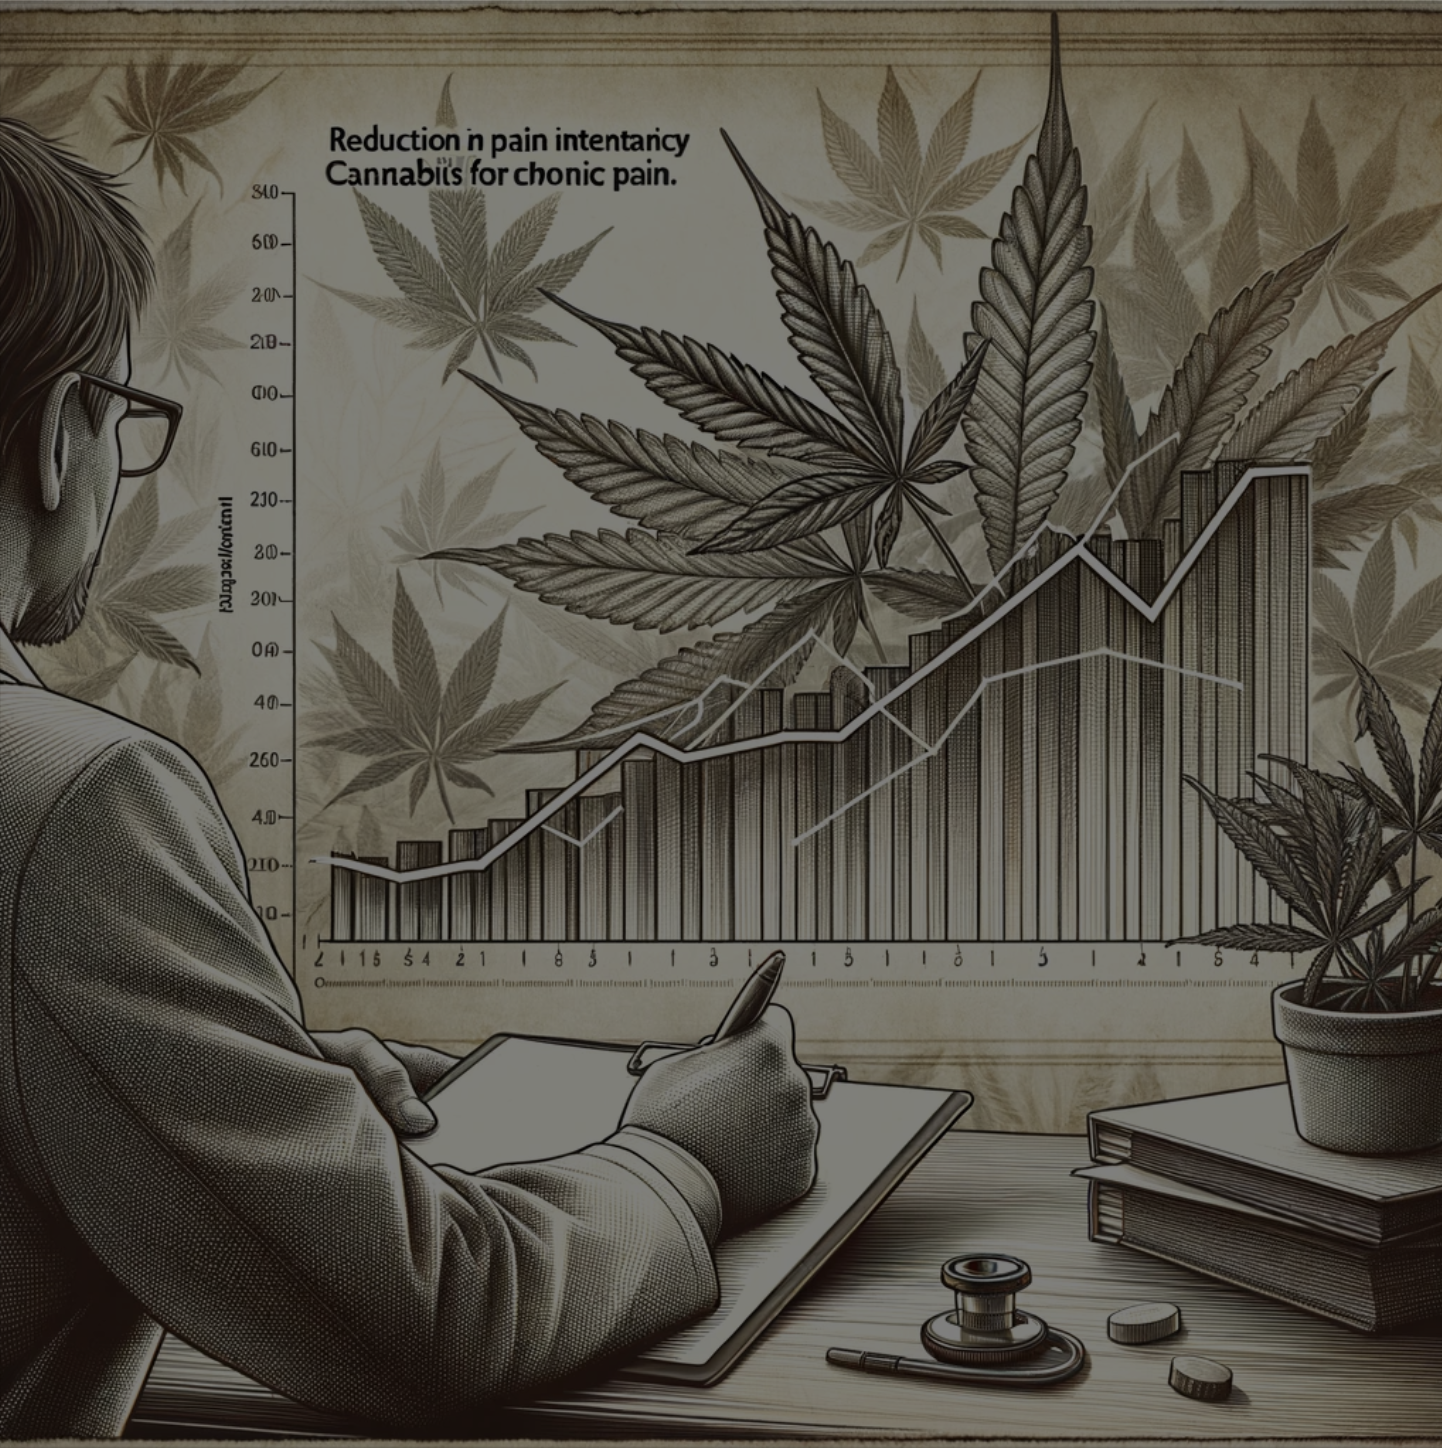 Engraving-style illustration of a graph depicting cannabis oil reducing chronic pain intensity in a study, with subtle cannabis leaf patterns in the background